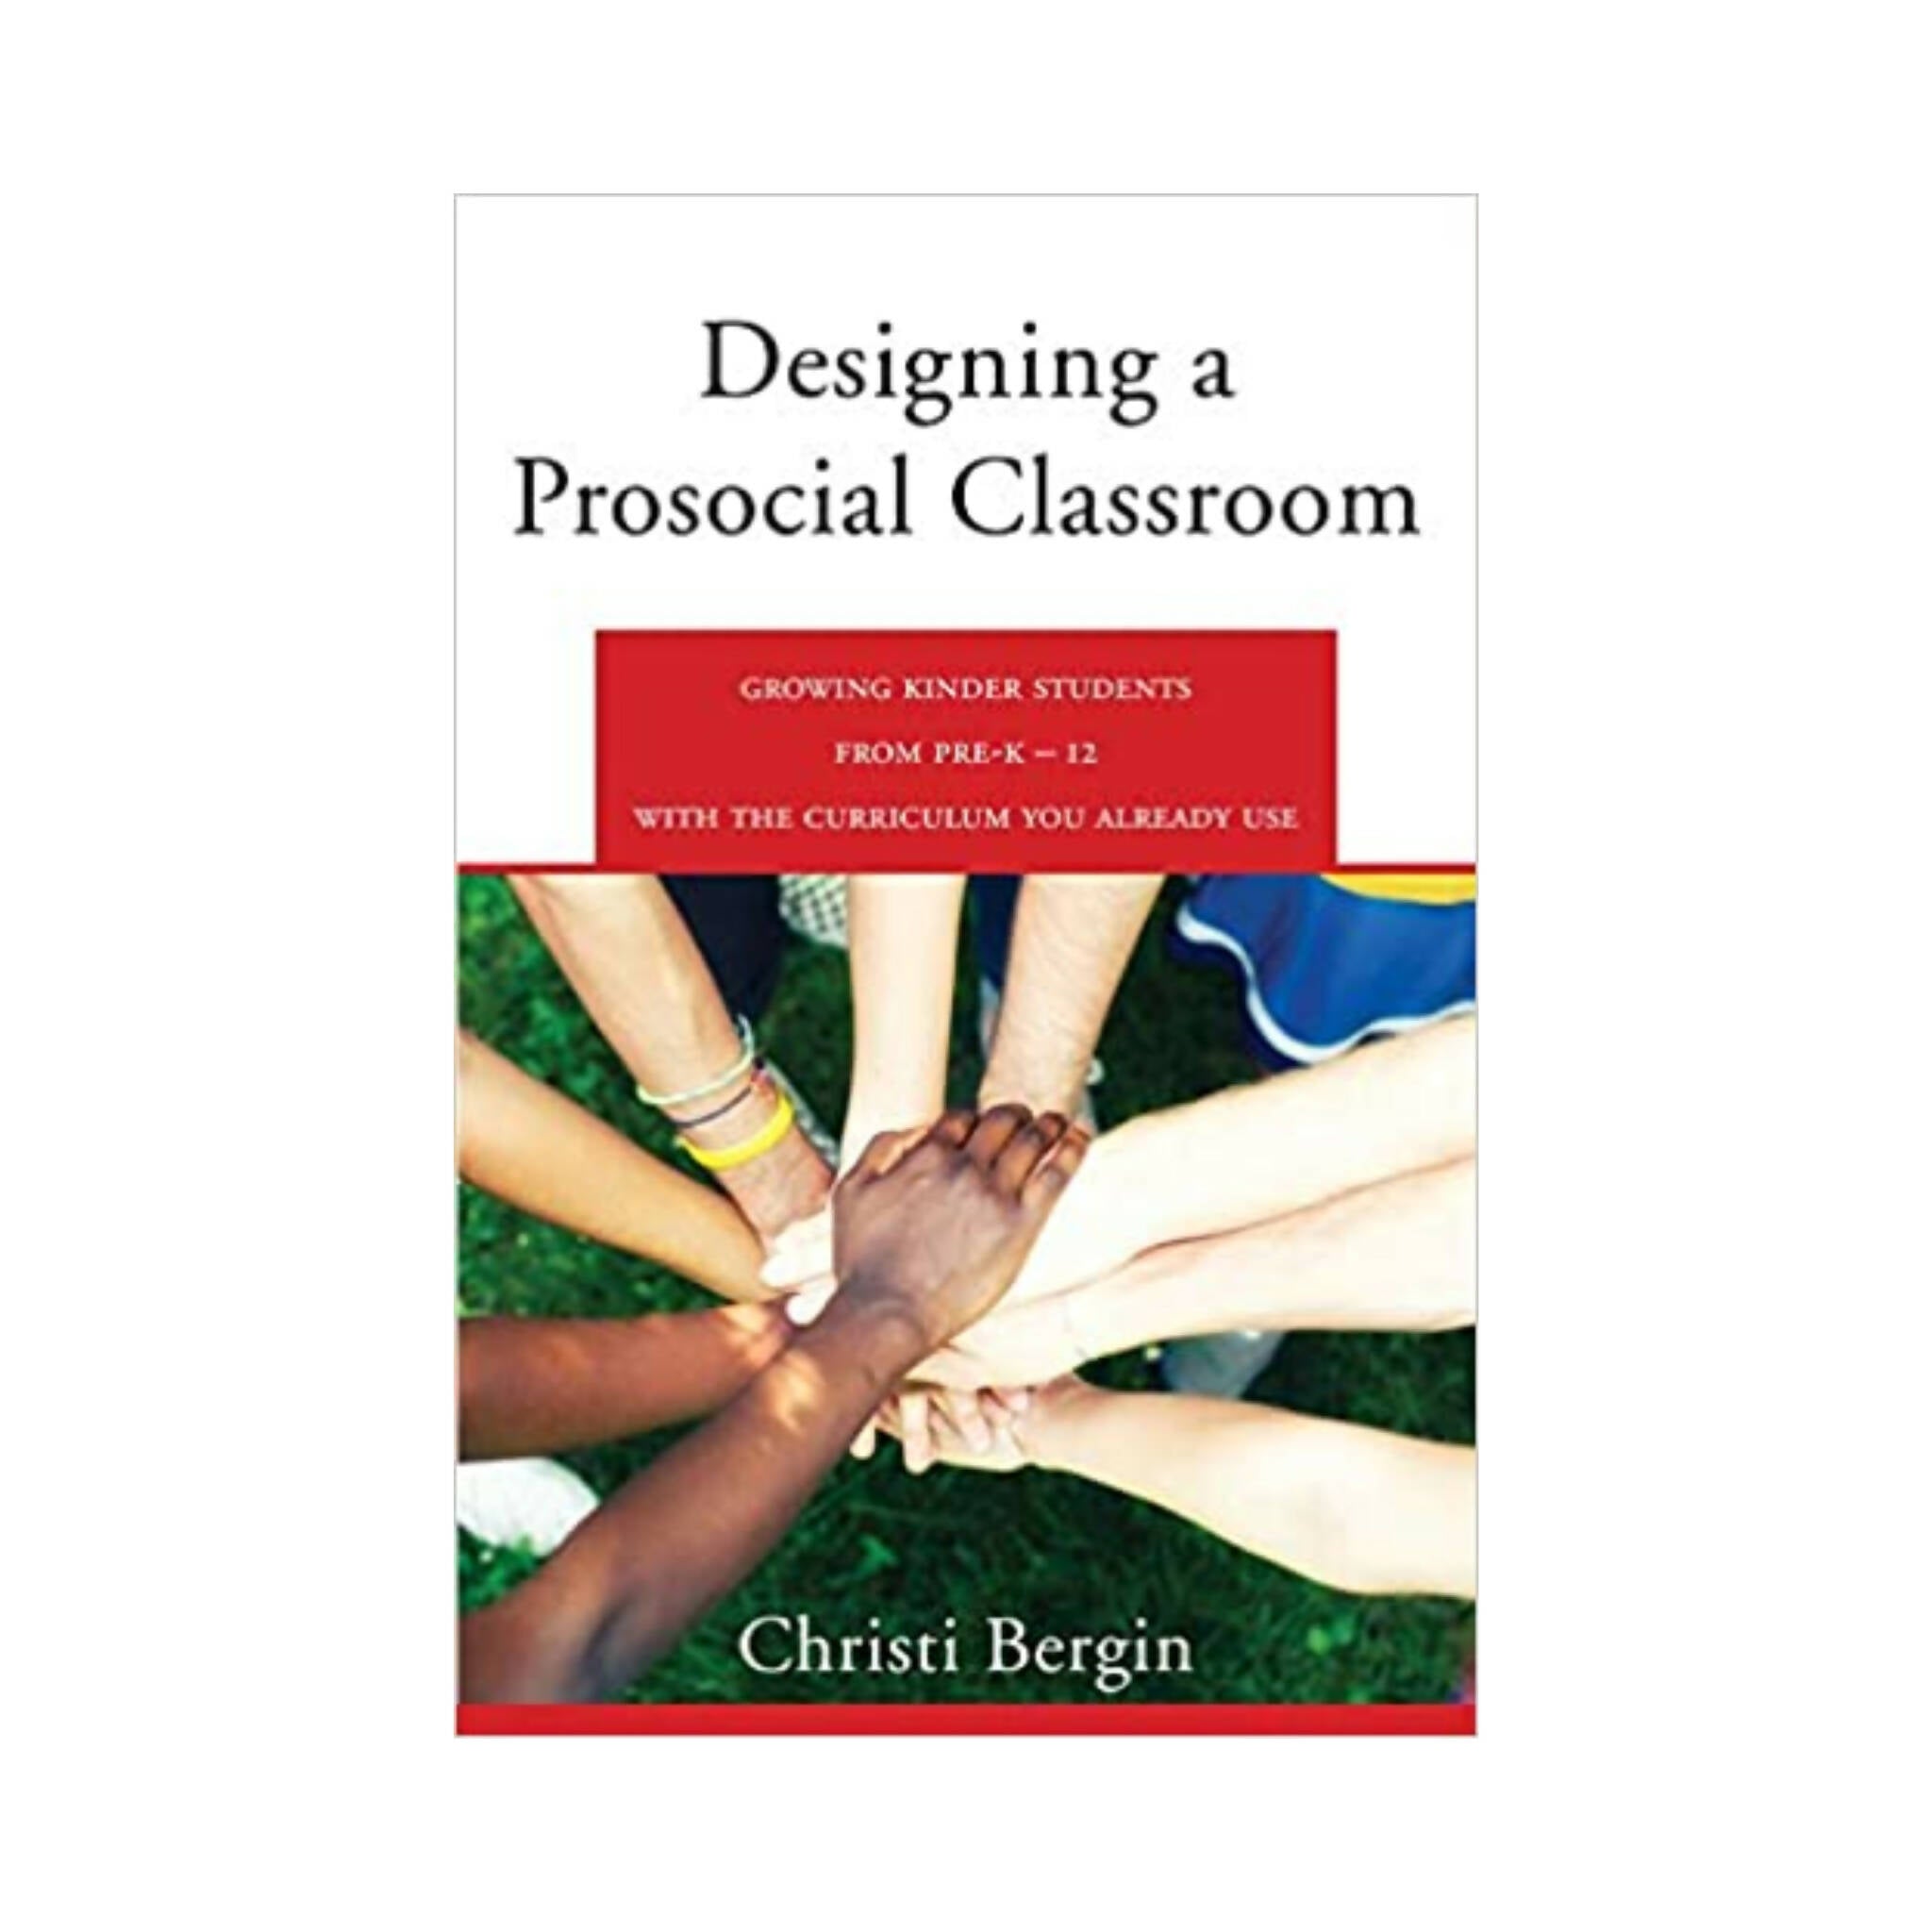 Book, Designing a Prosocial Classroom, Fostering Collaboration in Students from PreK-12